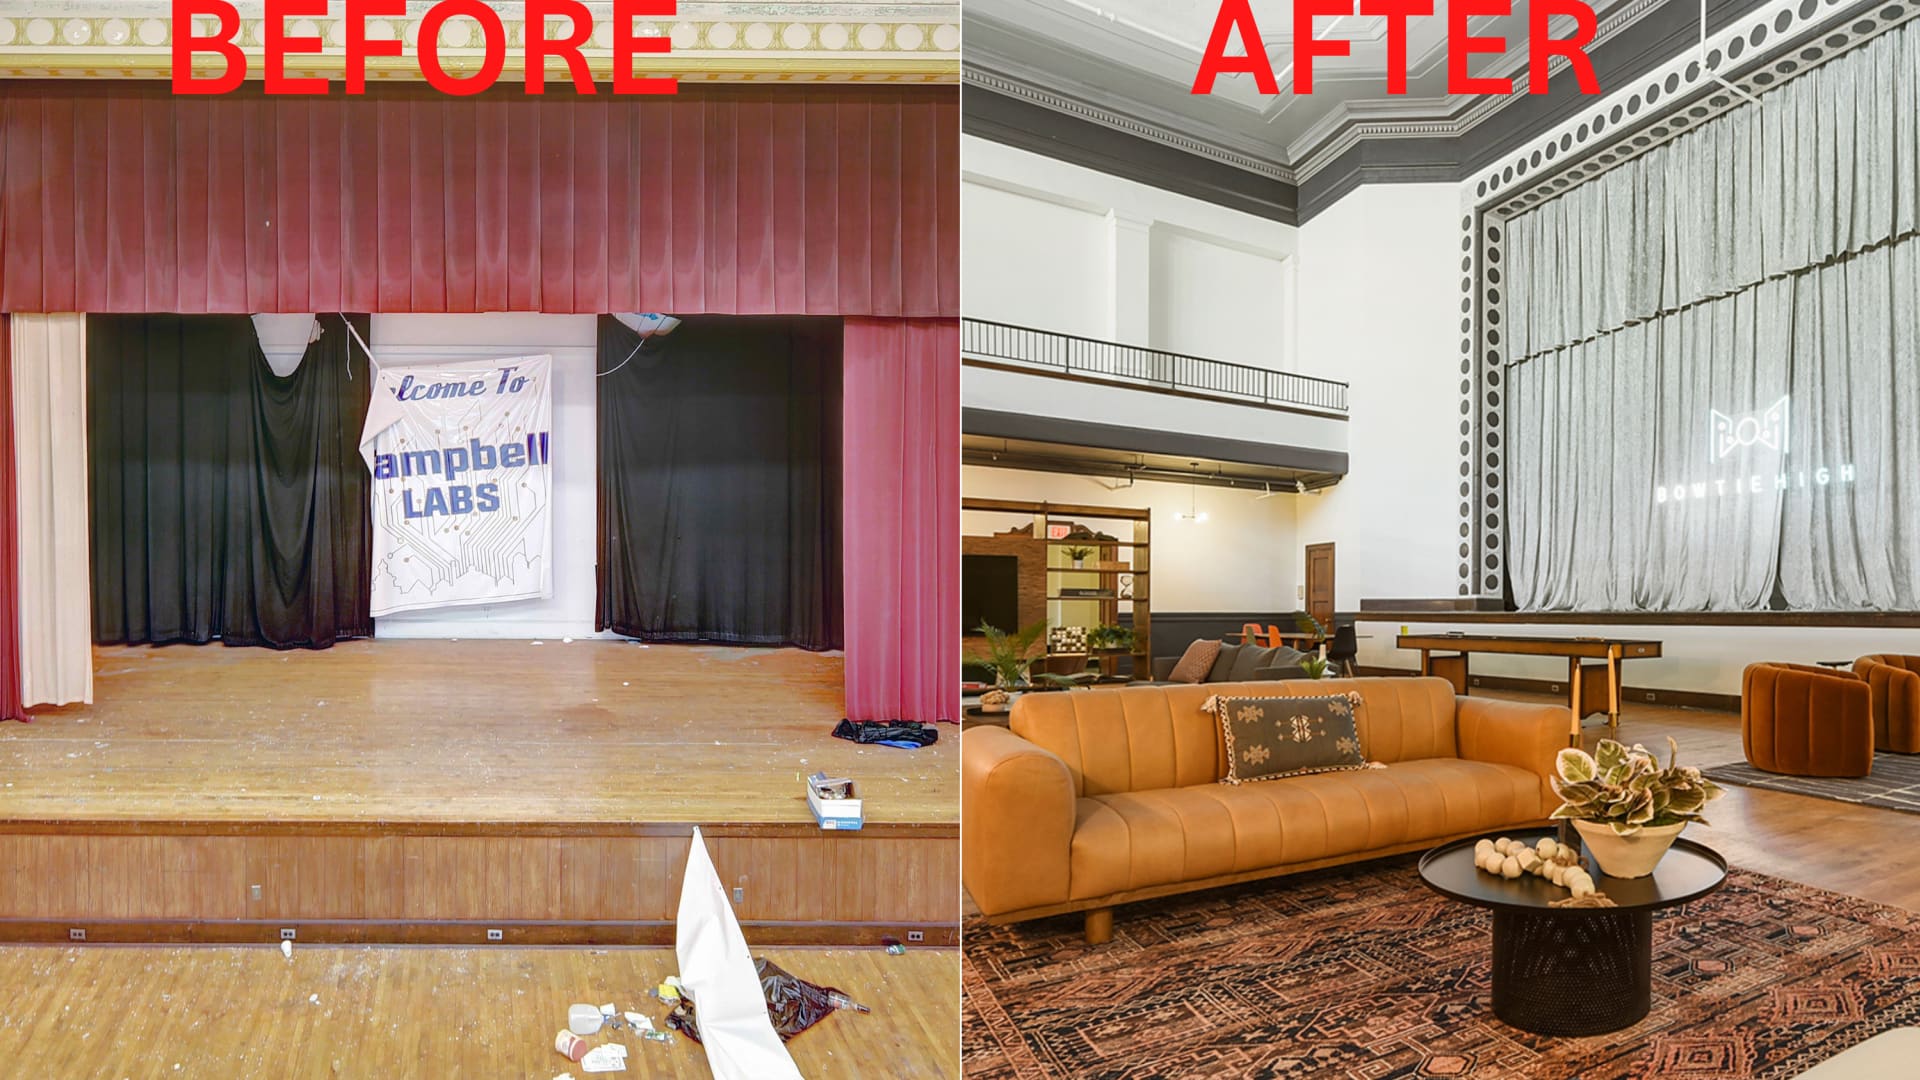 Millennials bought an abandoned high school for $100,000 and turned it into a 31-unit apartment building—take a look inside